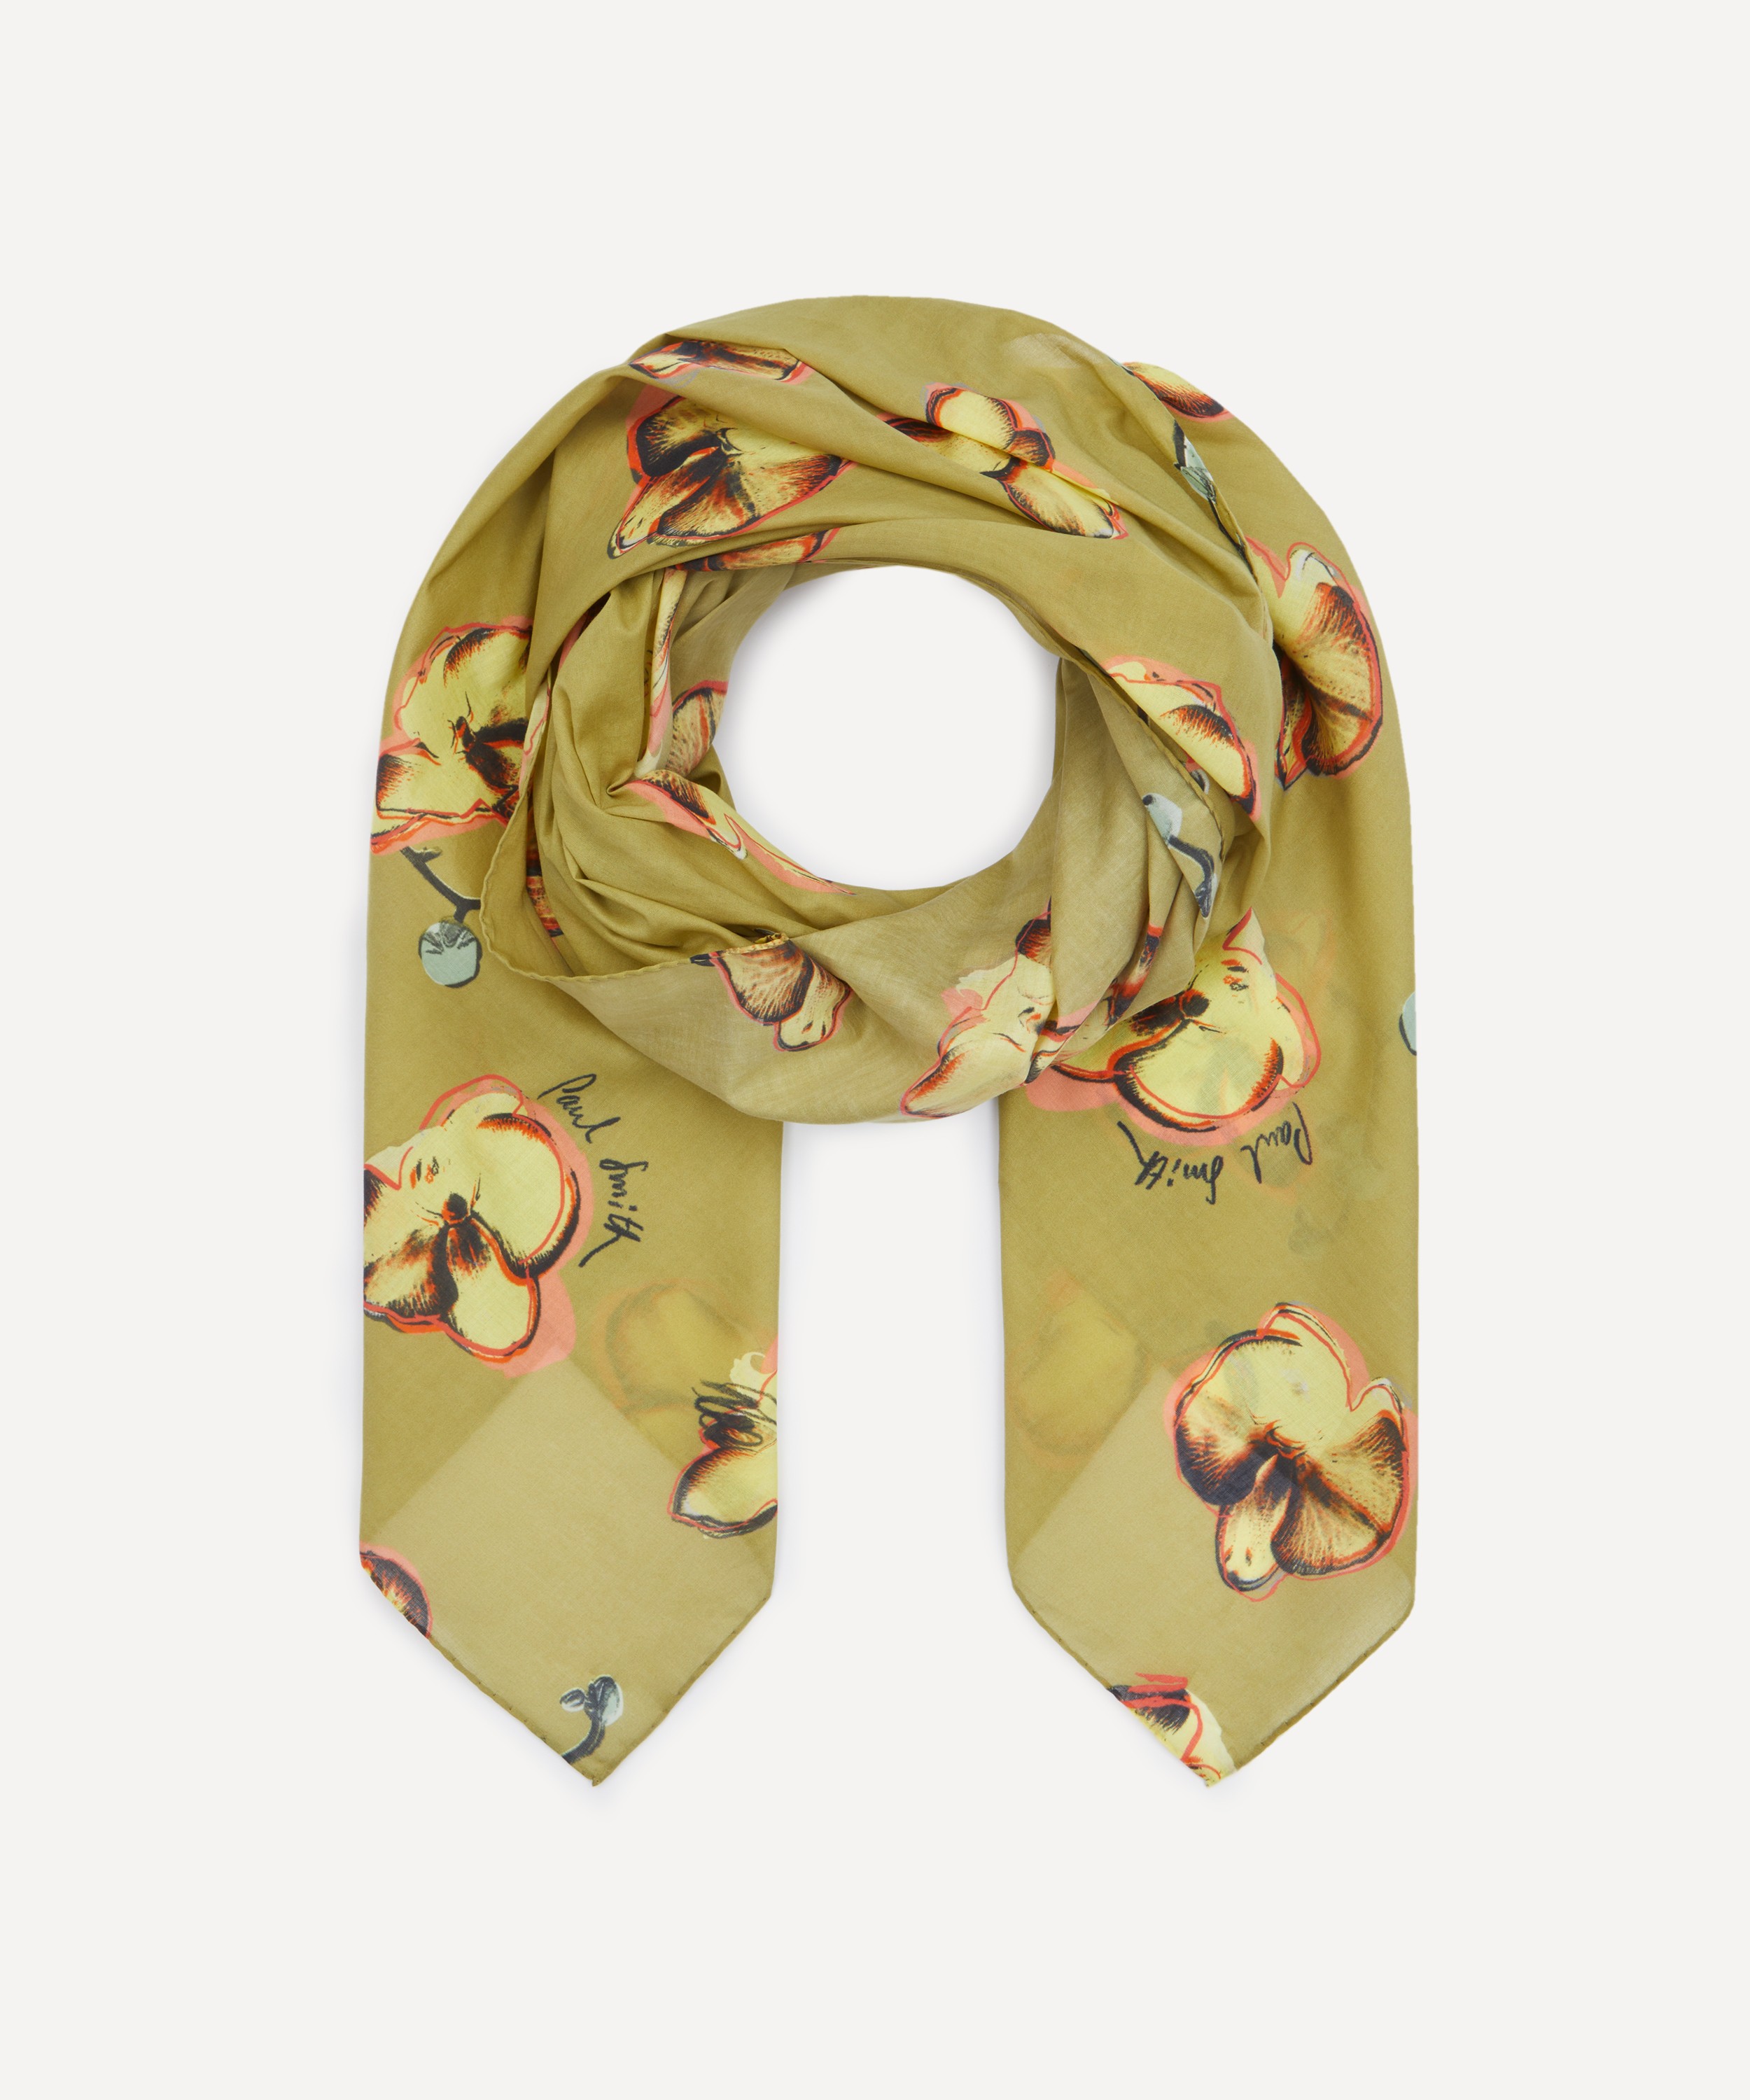 Paul Smith - Orchid Print Scarf